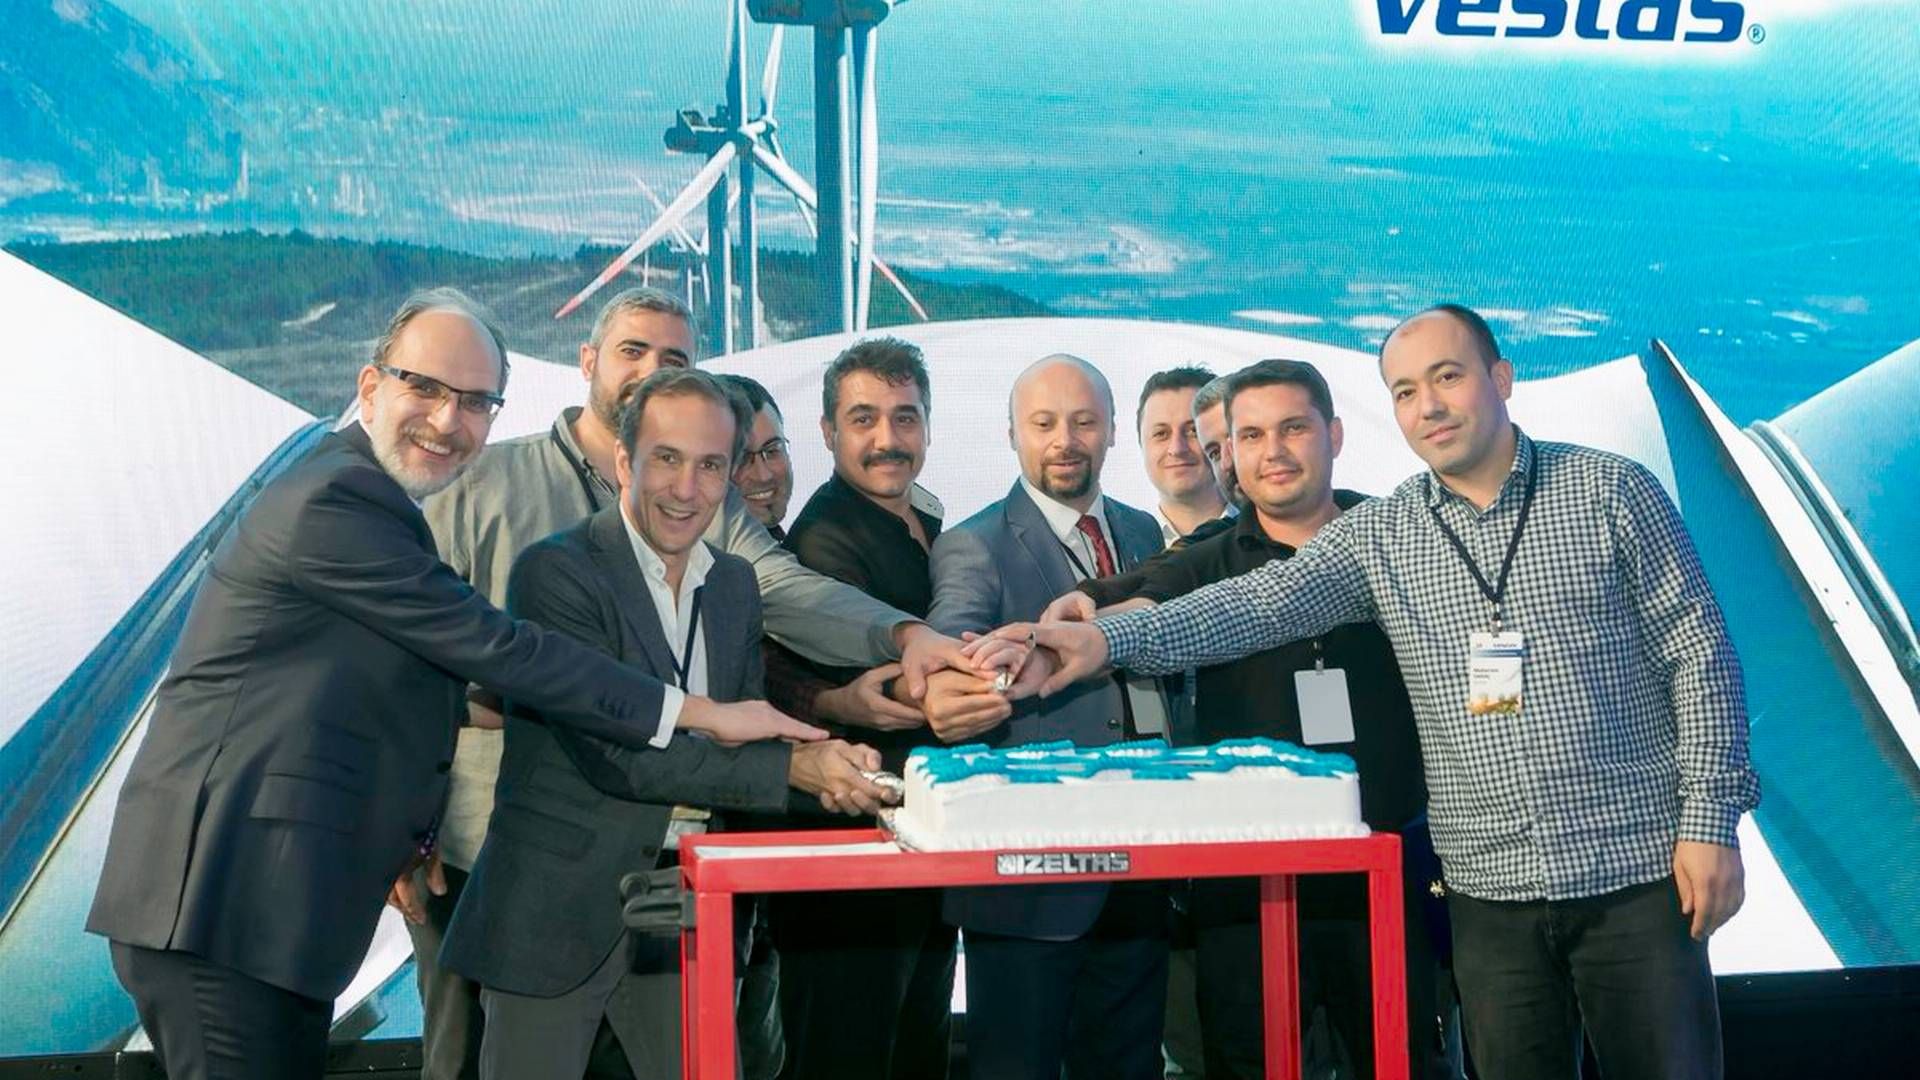 Most countries want a piece of the pie when it comes to wind energy jobs. Here, Vestas celebrates 10 years in Turkey and its new operations center. | Photo: Vestas